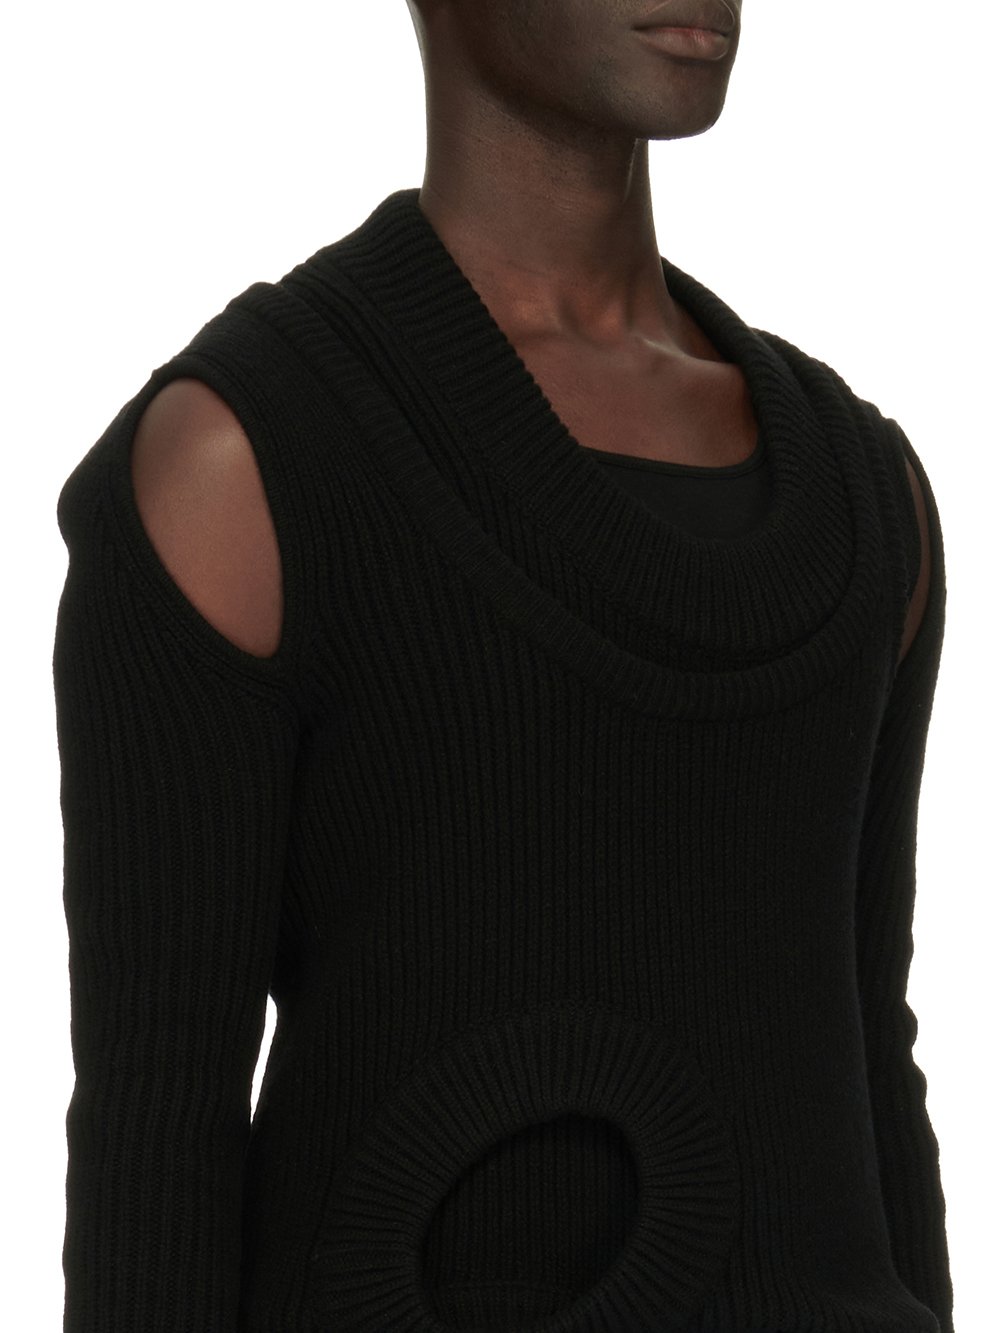 RICK OWENS FW23 LUXOR BANANA LS IN BLACK RECYCLED CASHMERE KNIT